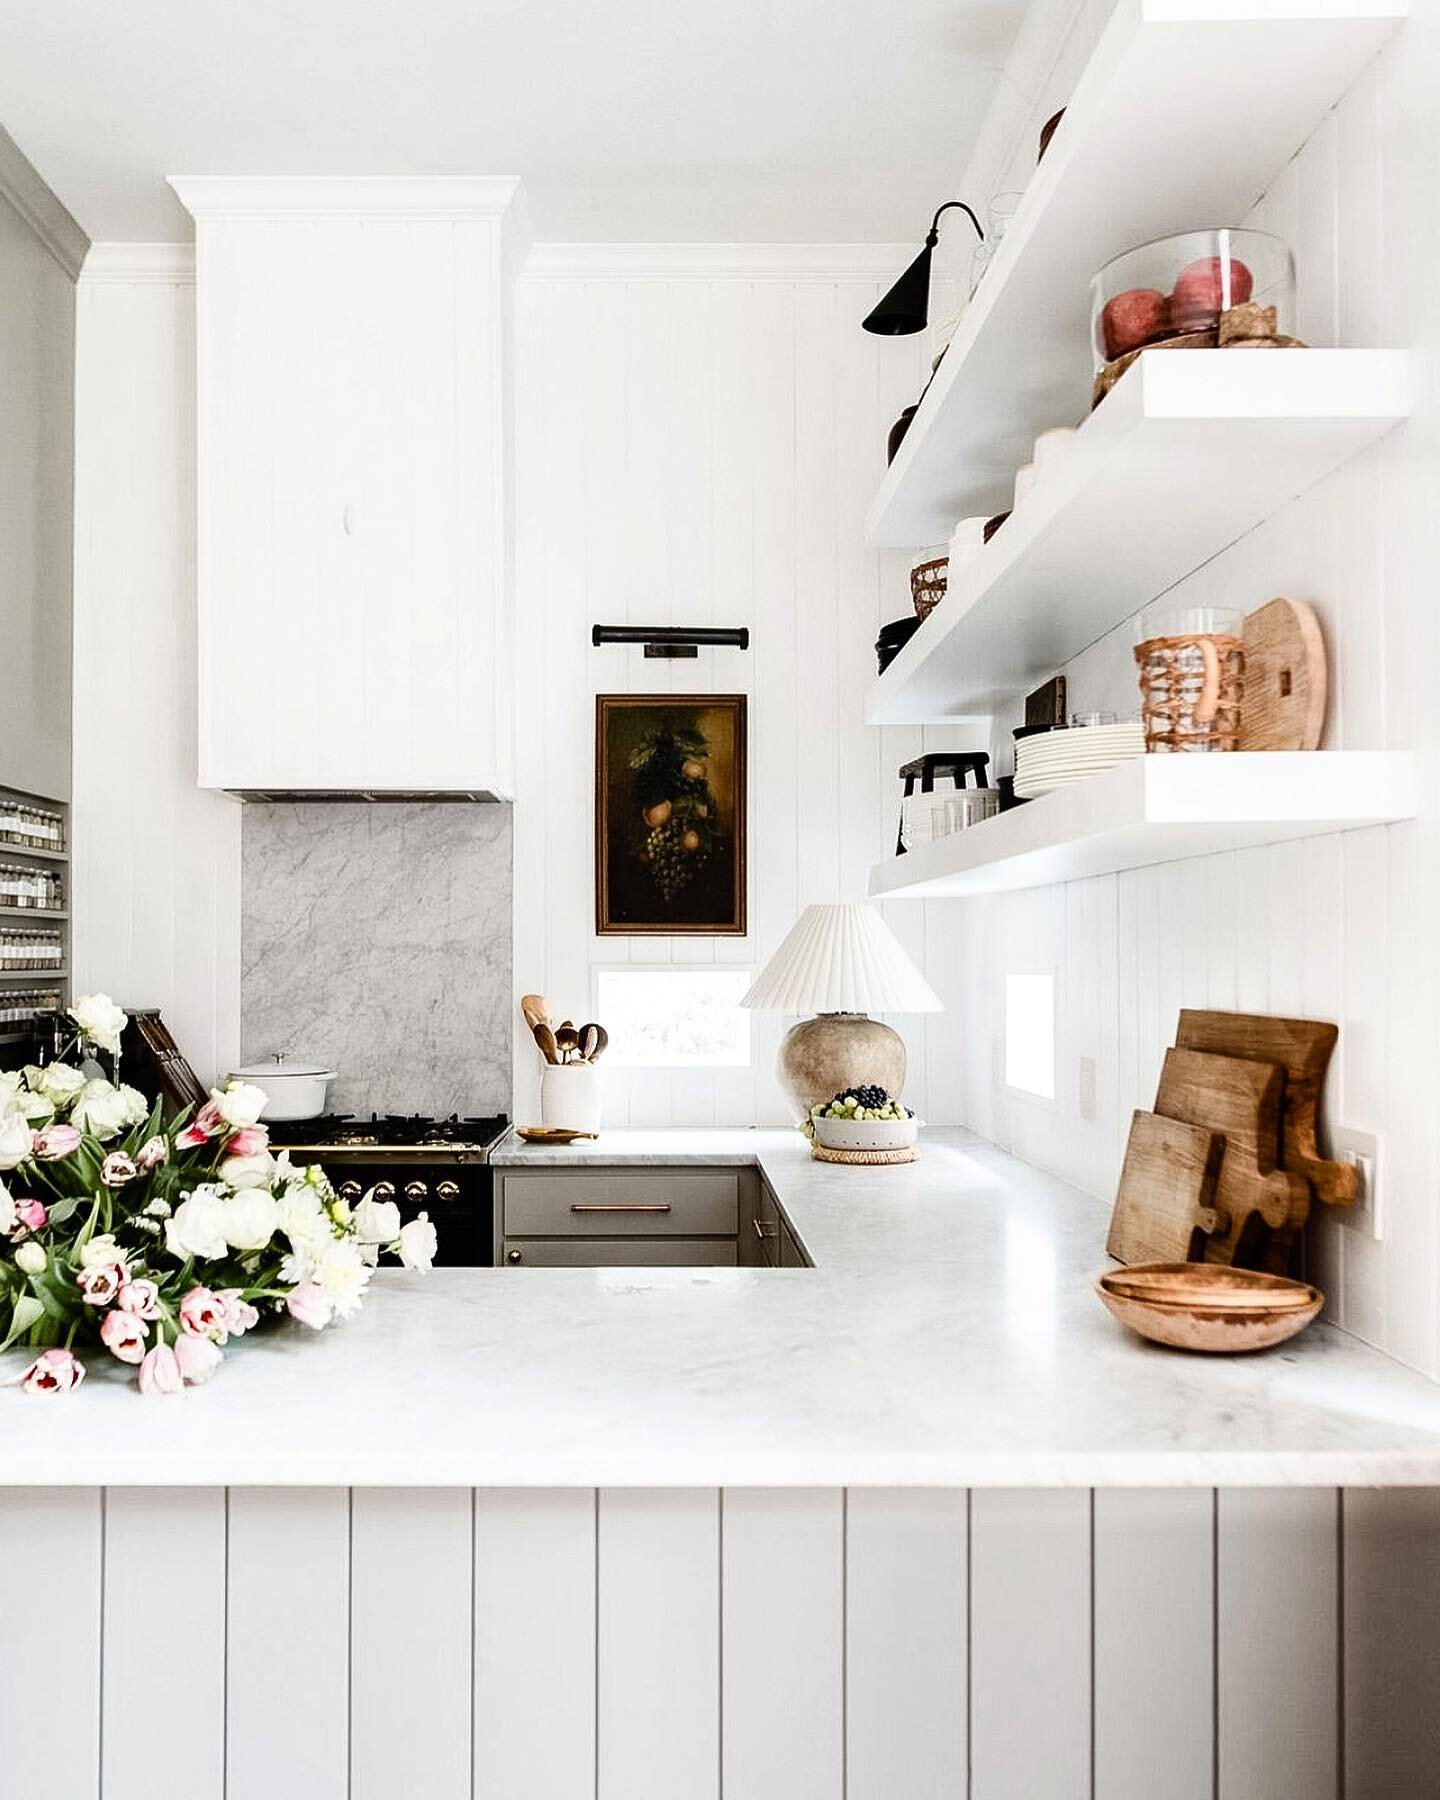 Happy Friday Eve! 🖤 Excuse us while we immediately go buy a lamp for the kitchen &amp; pick up some fresh flowers after seeing this well-curated space by @theidentitecollective 😍 Unexpected elements in an often-neglected styling area really make an